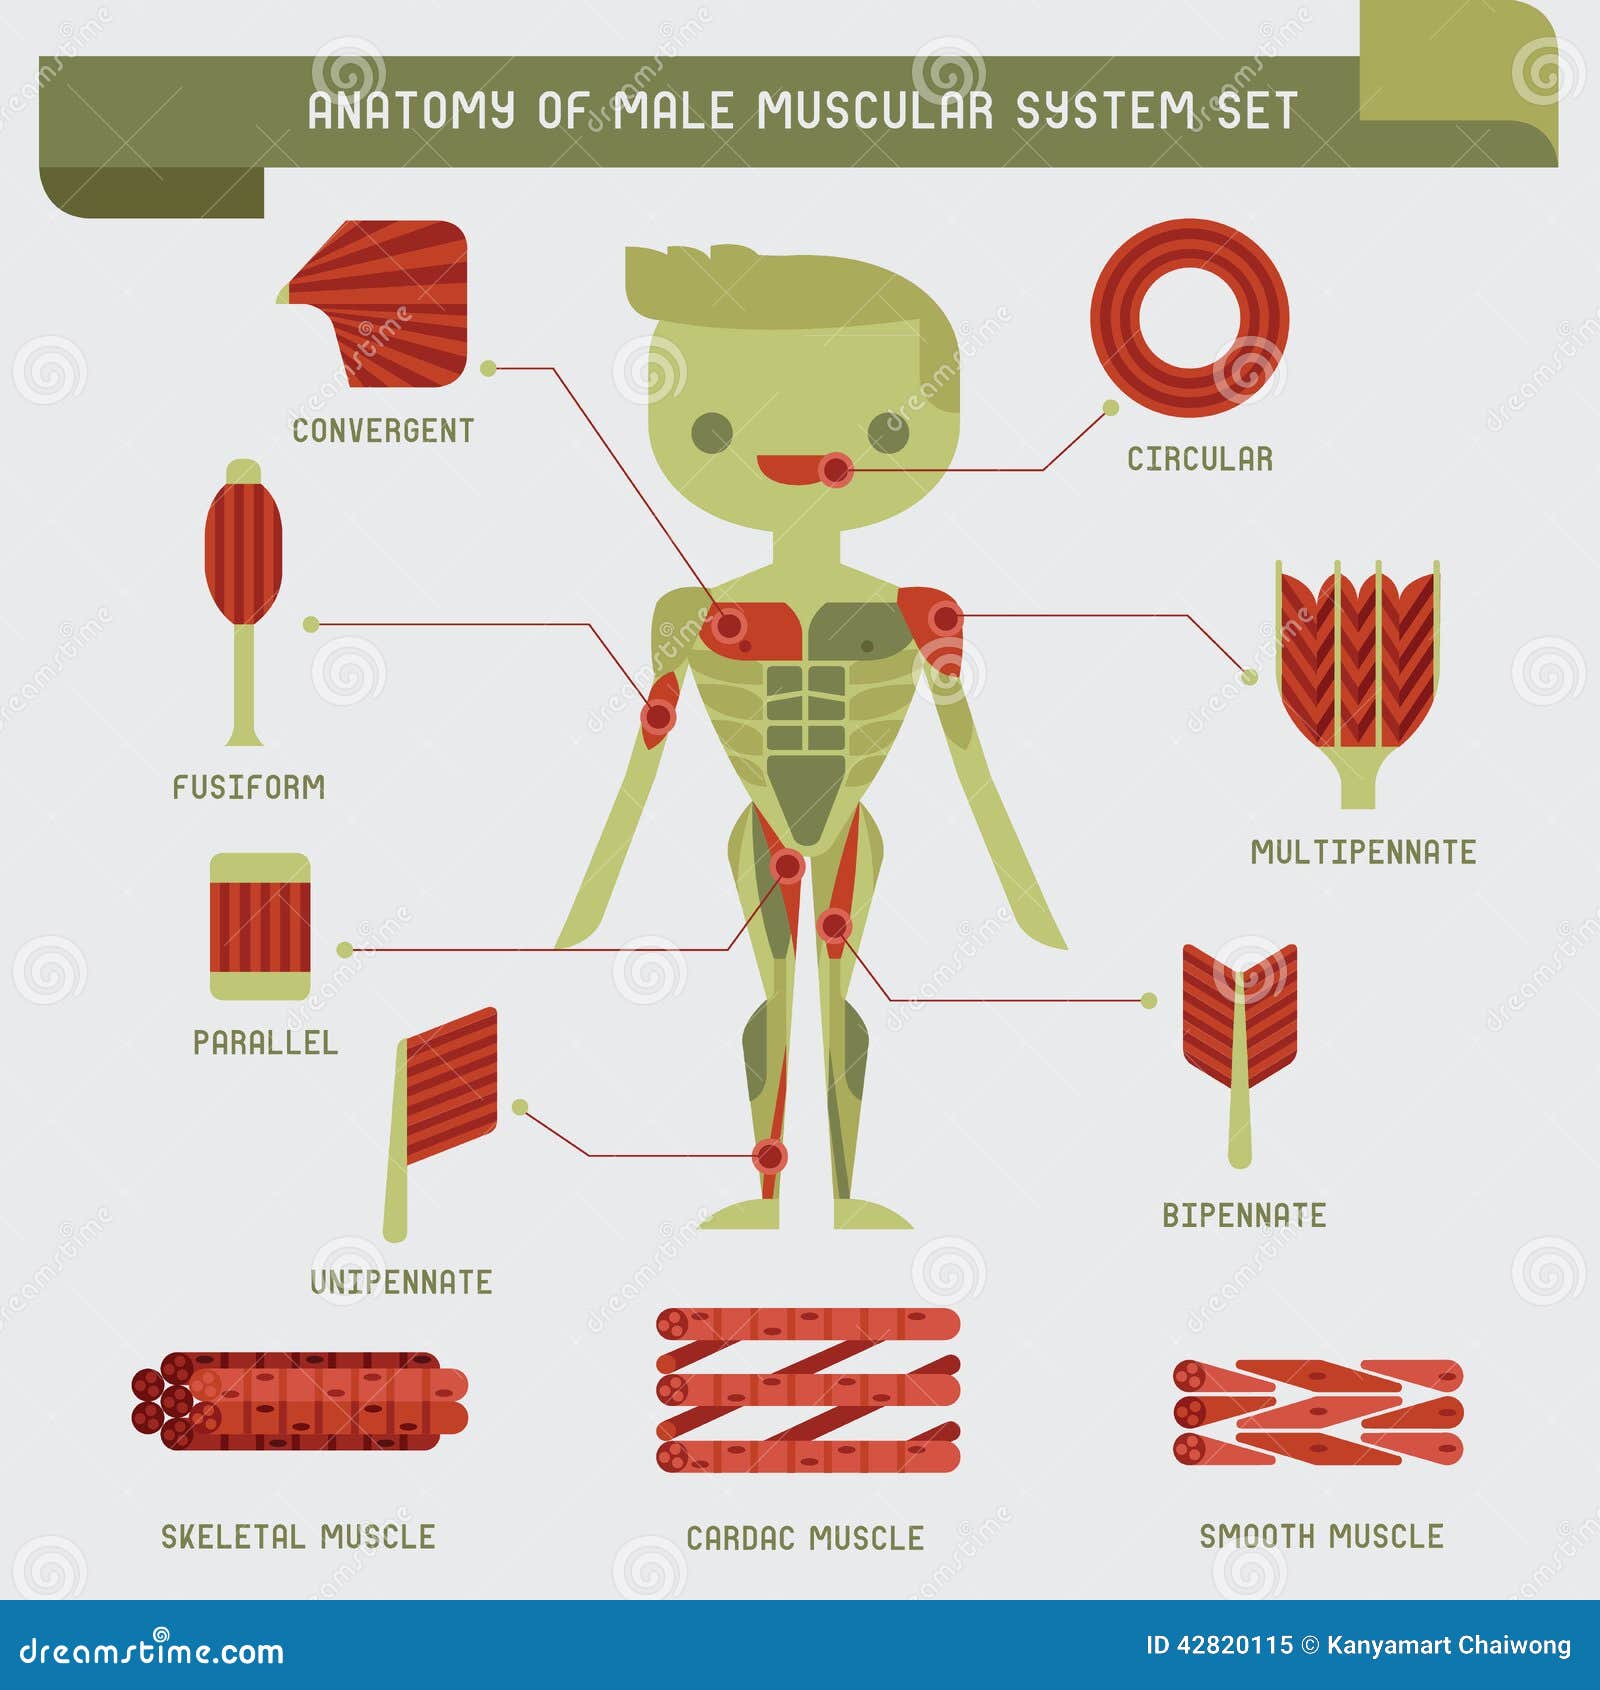 anatomy of male muscular system